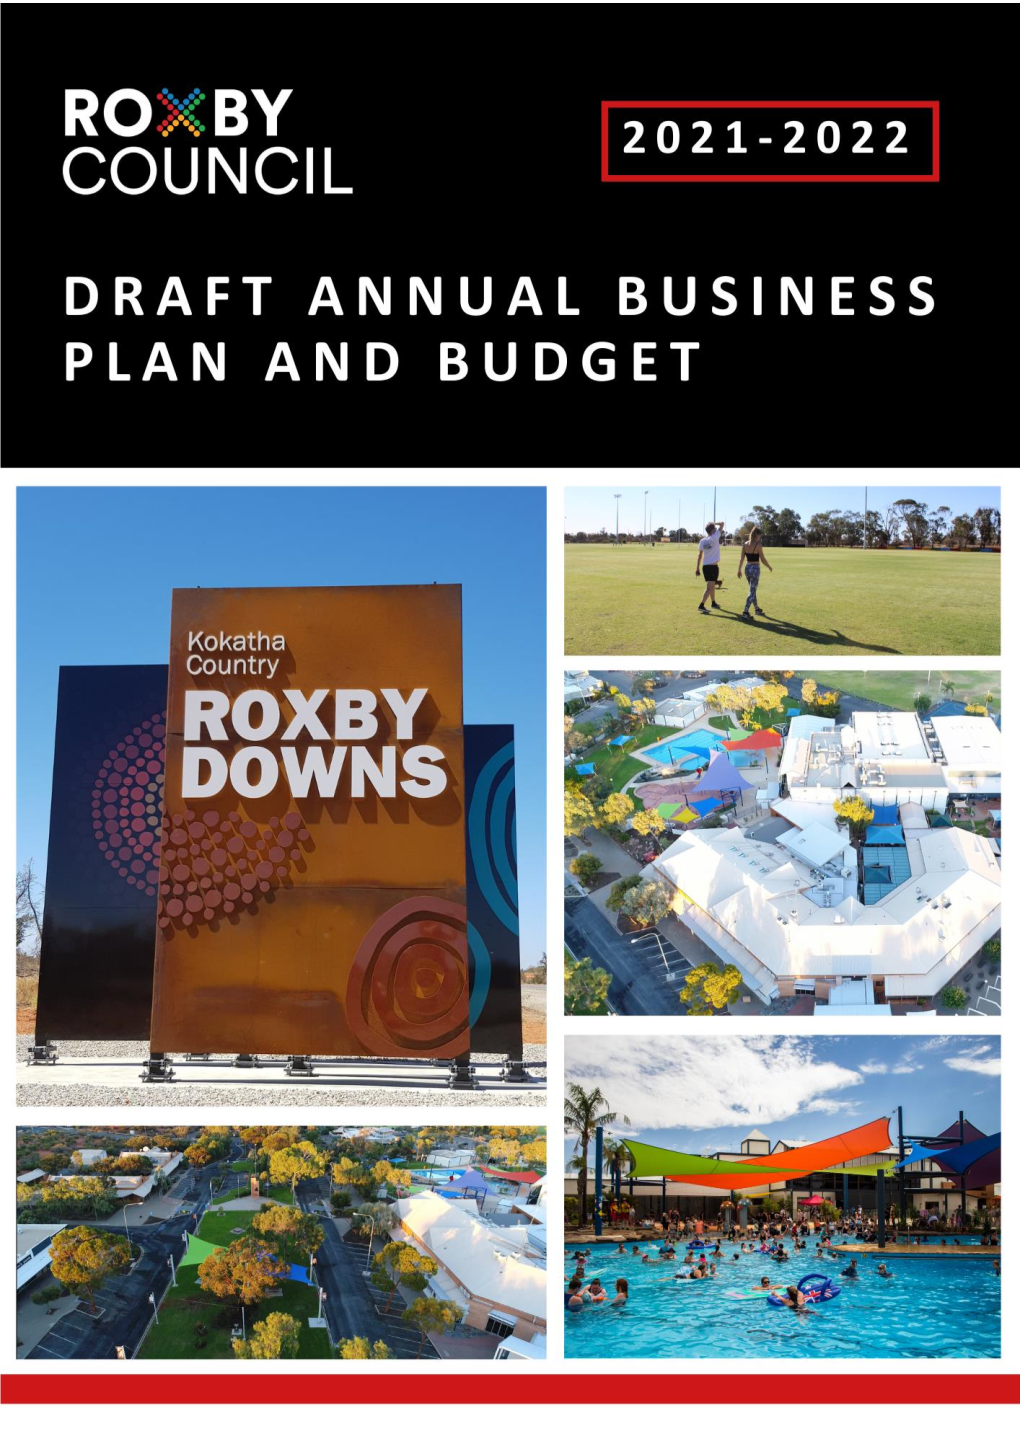 Draft Annual Business Plan and Budget FY 2021/2022